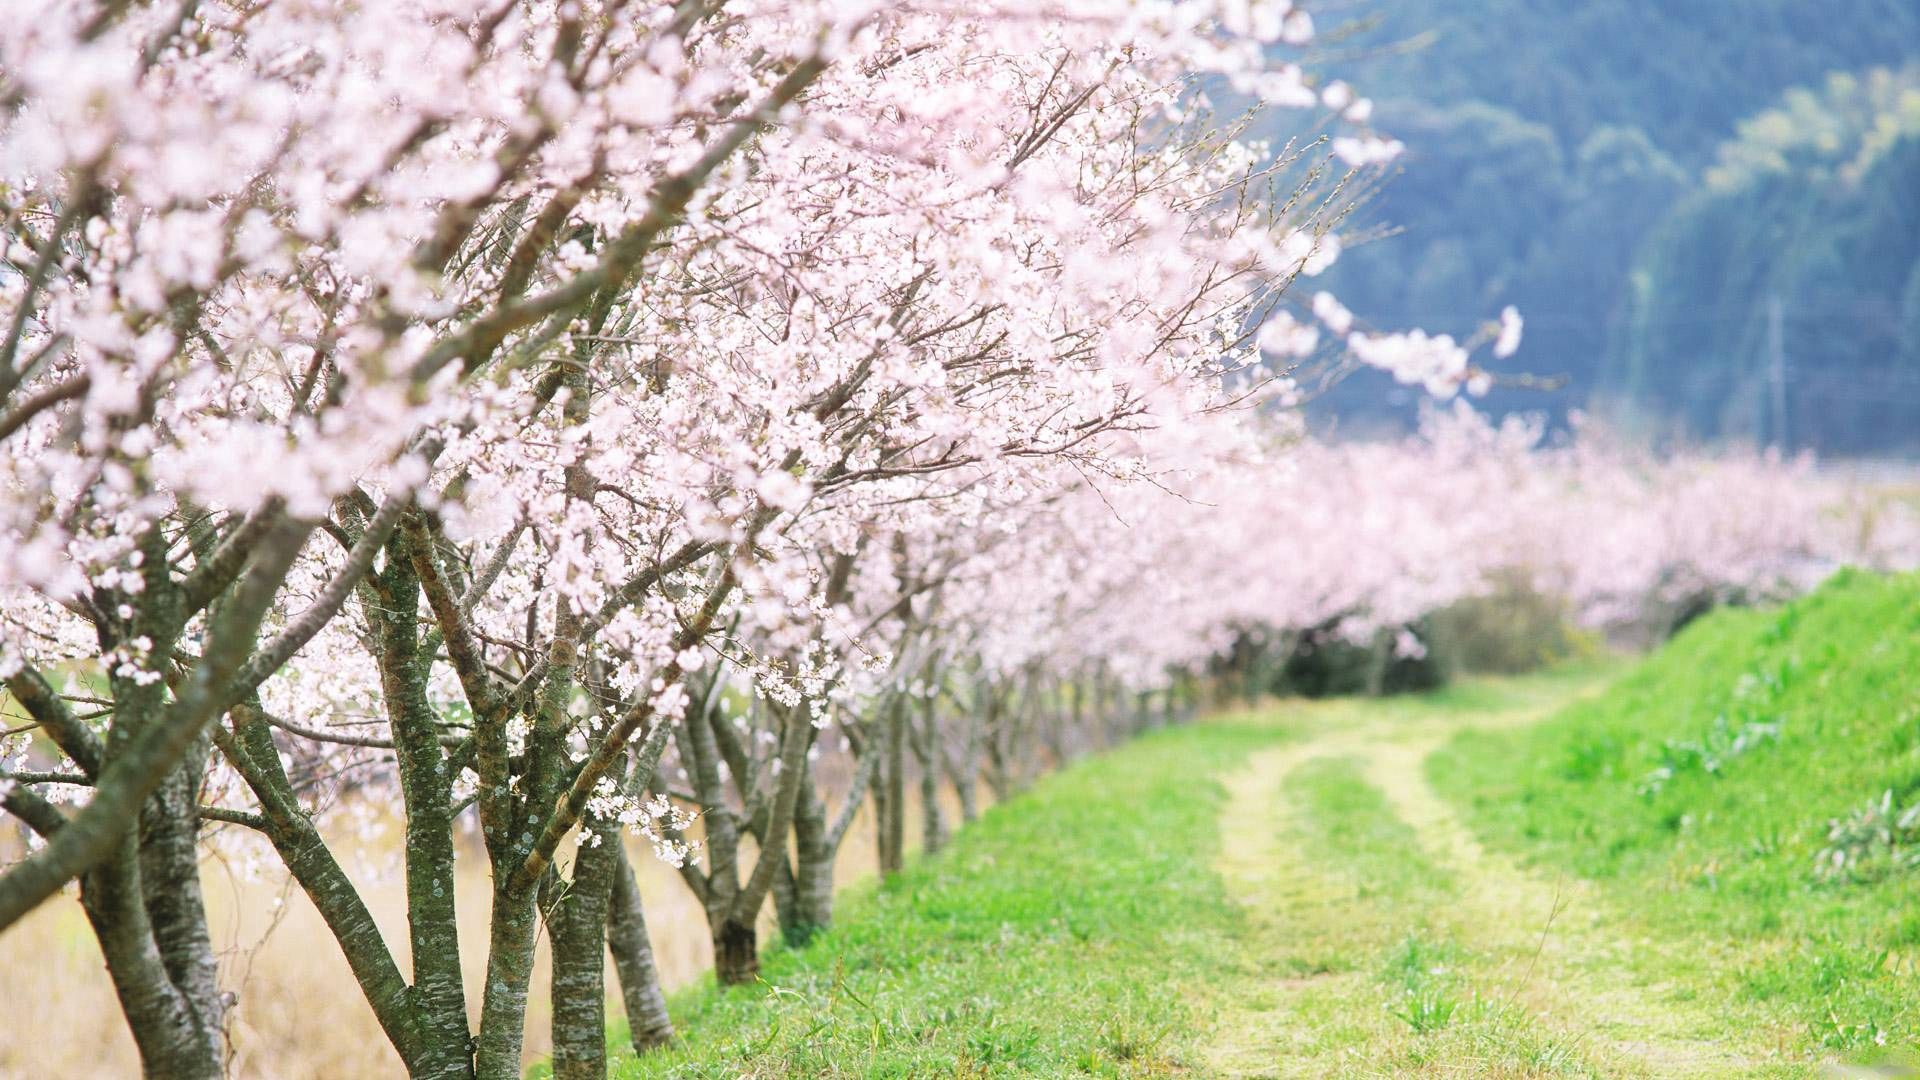 spring, nature, trees, road, bloom, flowering, garden, country, countryside